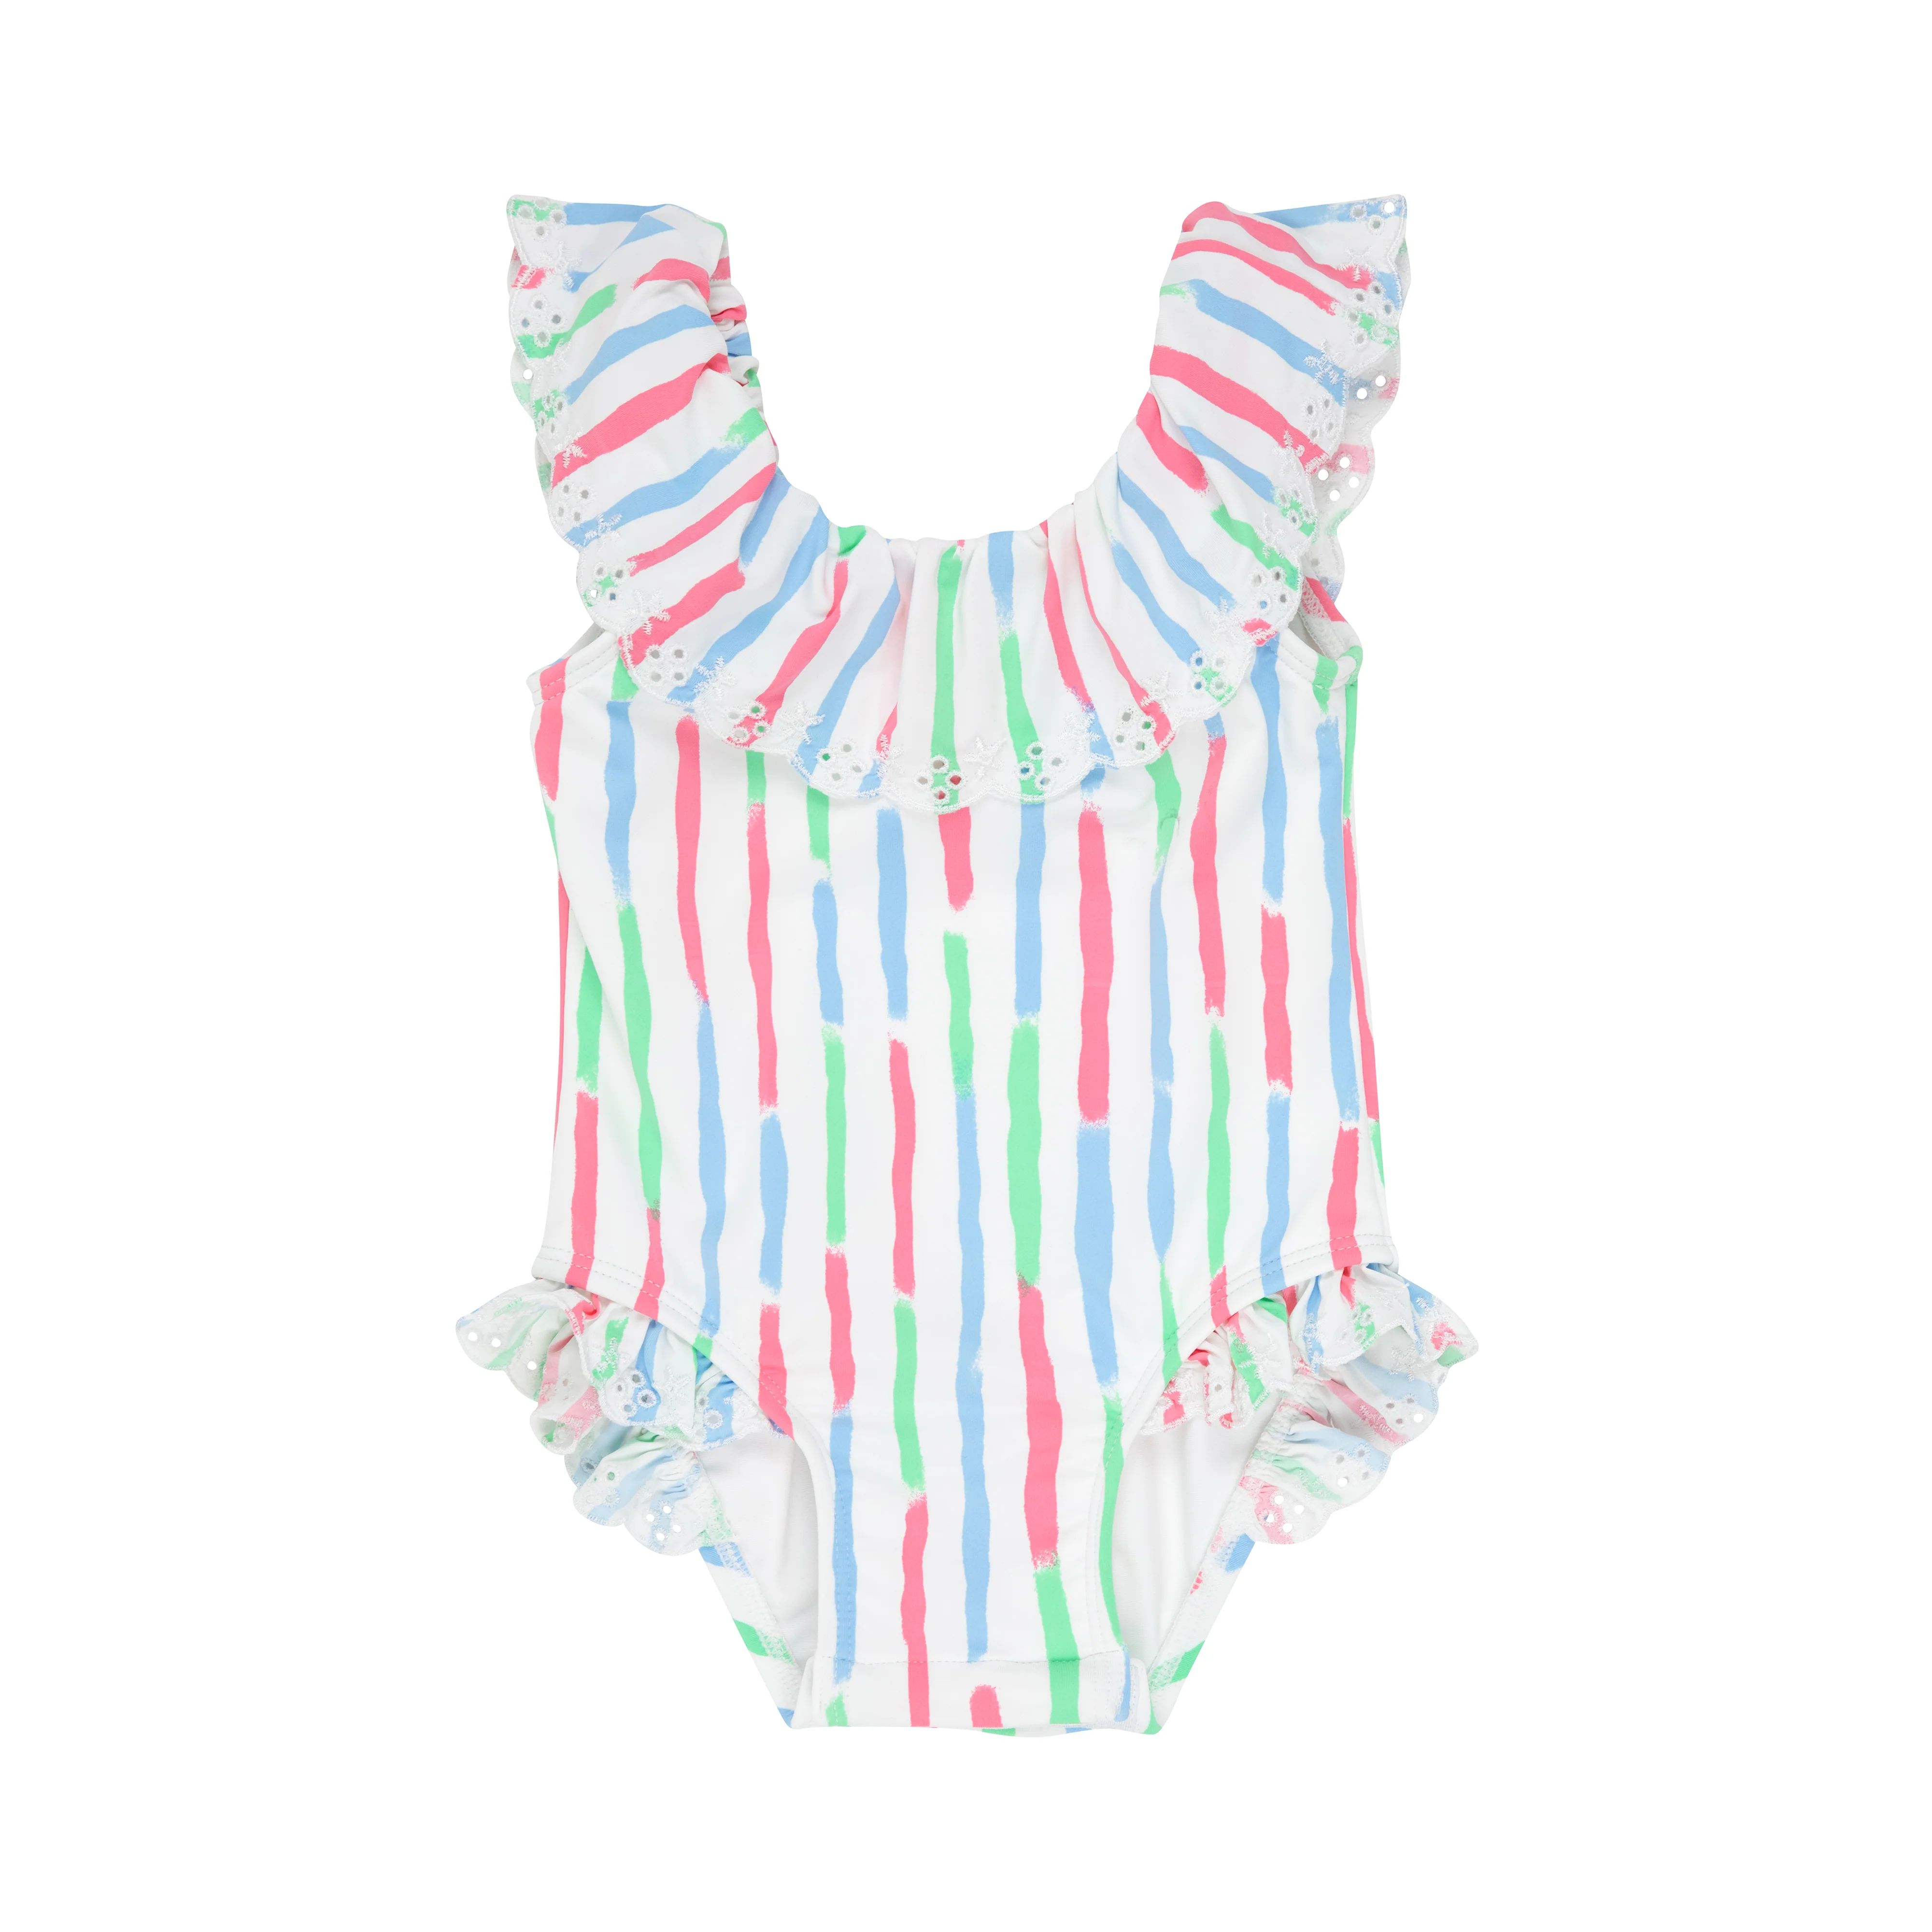 Sandy Lane Swimsuit - White Sand Watercolor with Eyelet | The Beaufort Bonnet Company